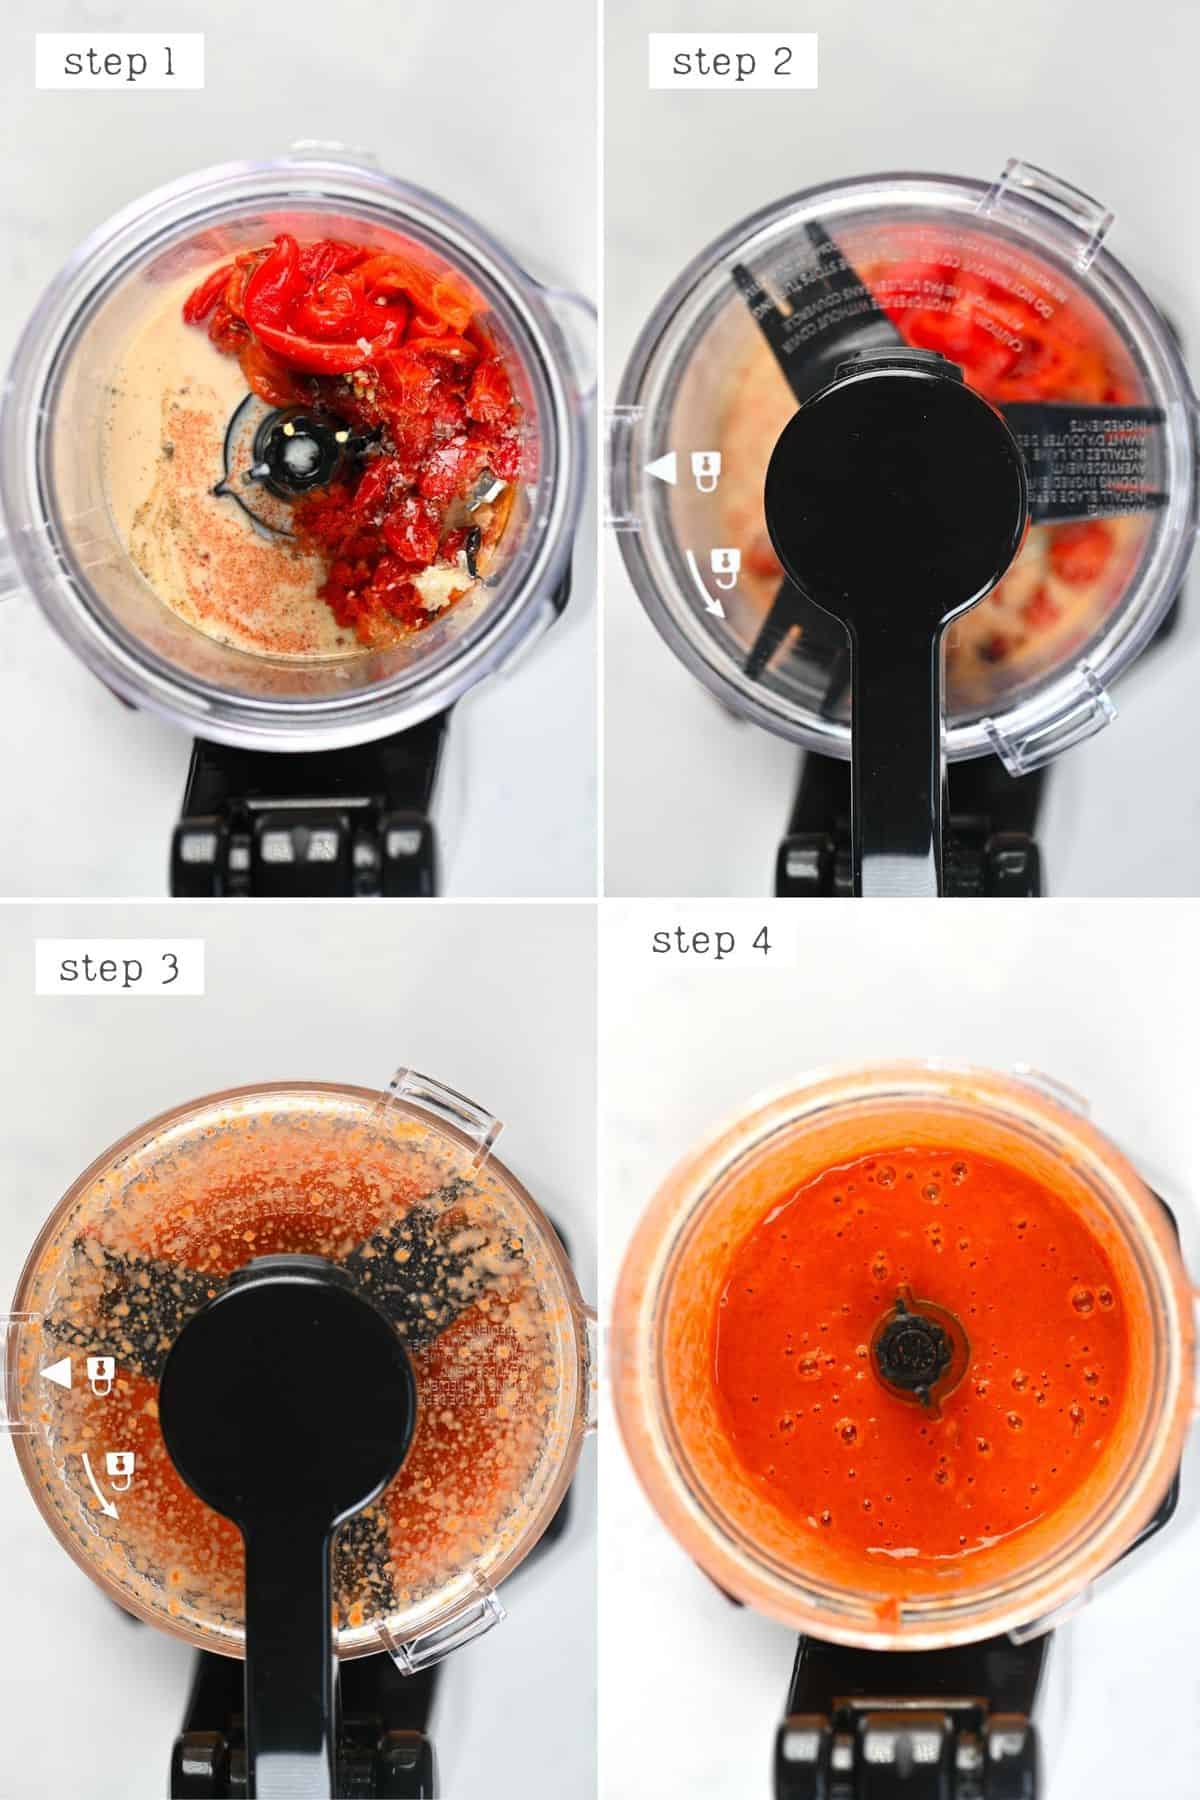 Steps for making red pepper sauce